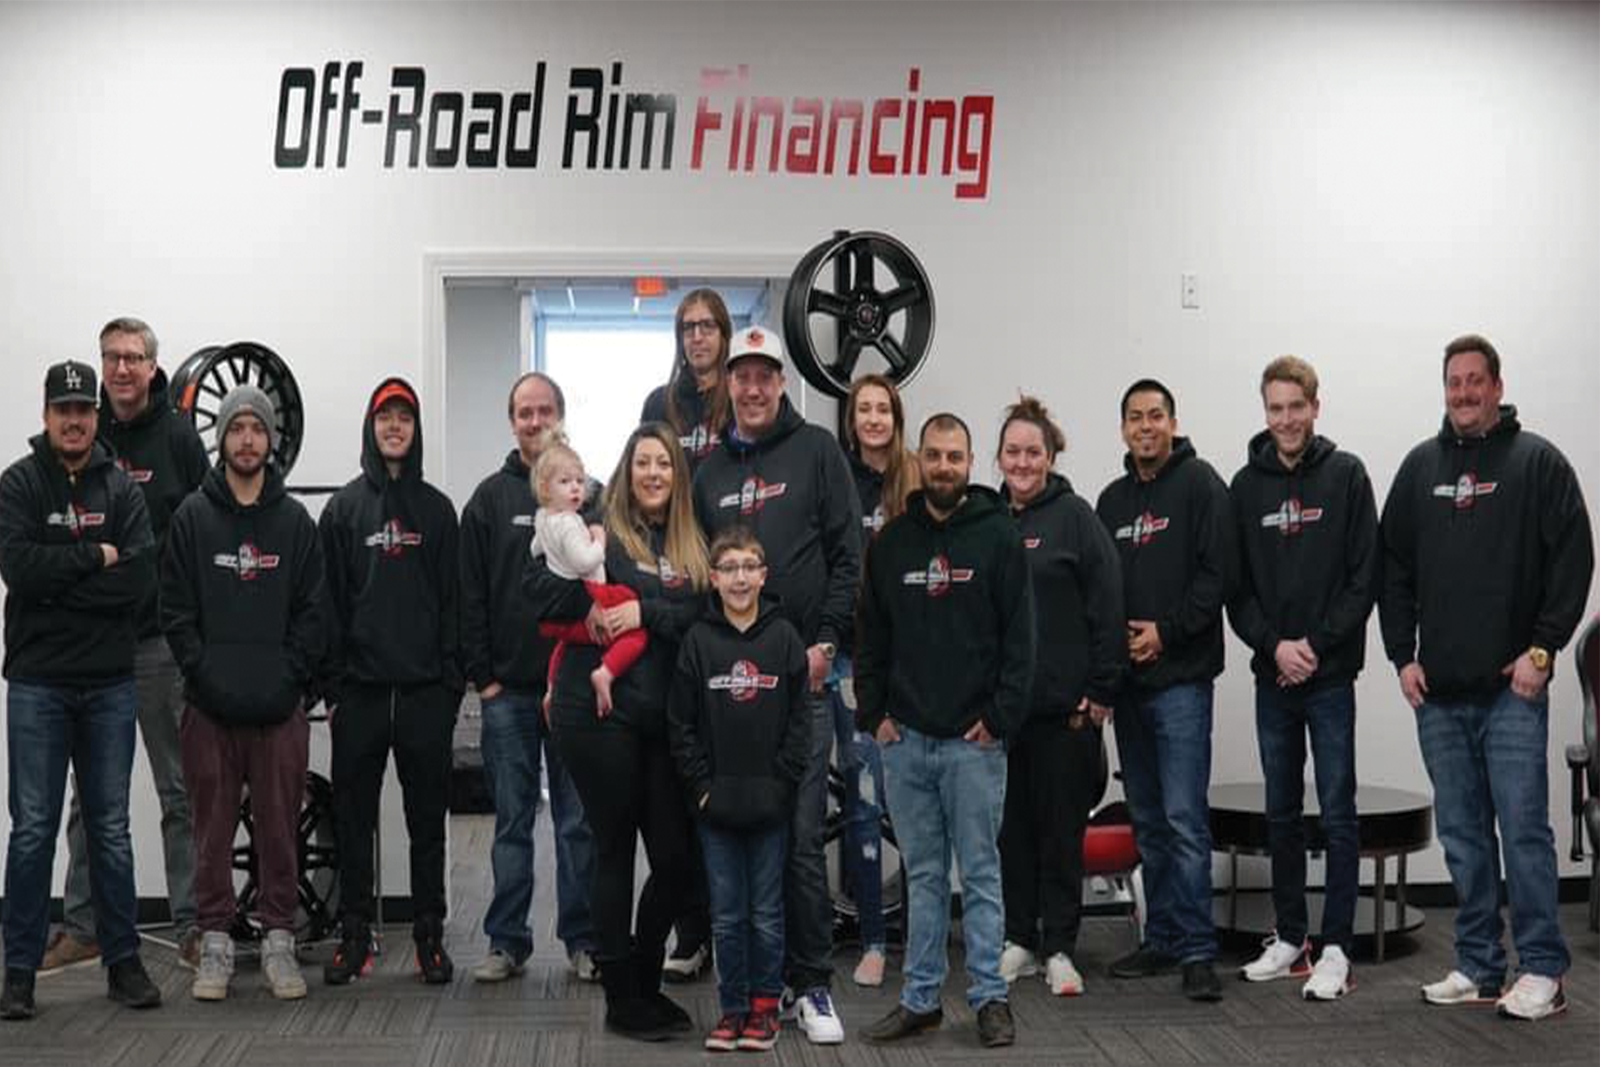 Off Road Rim Financing employees standing for a group photo